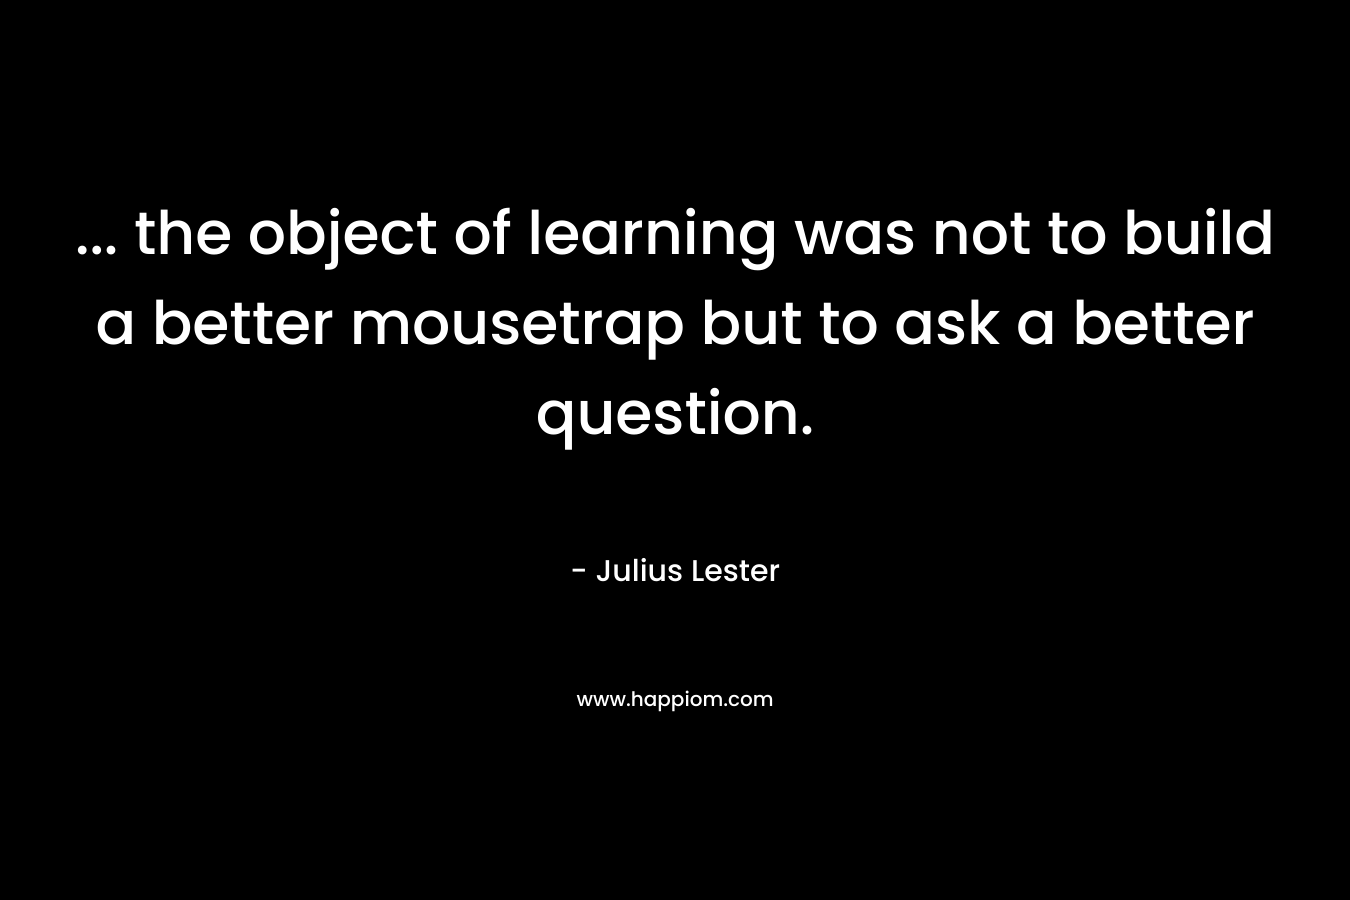 … the object of learning was not to build a better mousetrap but to ask a better question. – Julius Lester